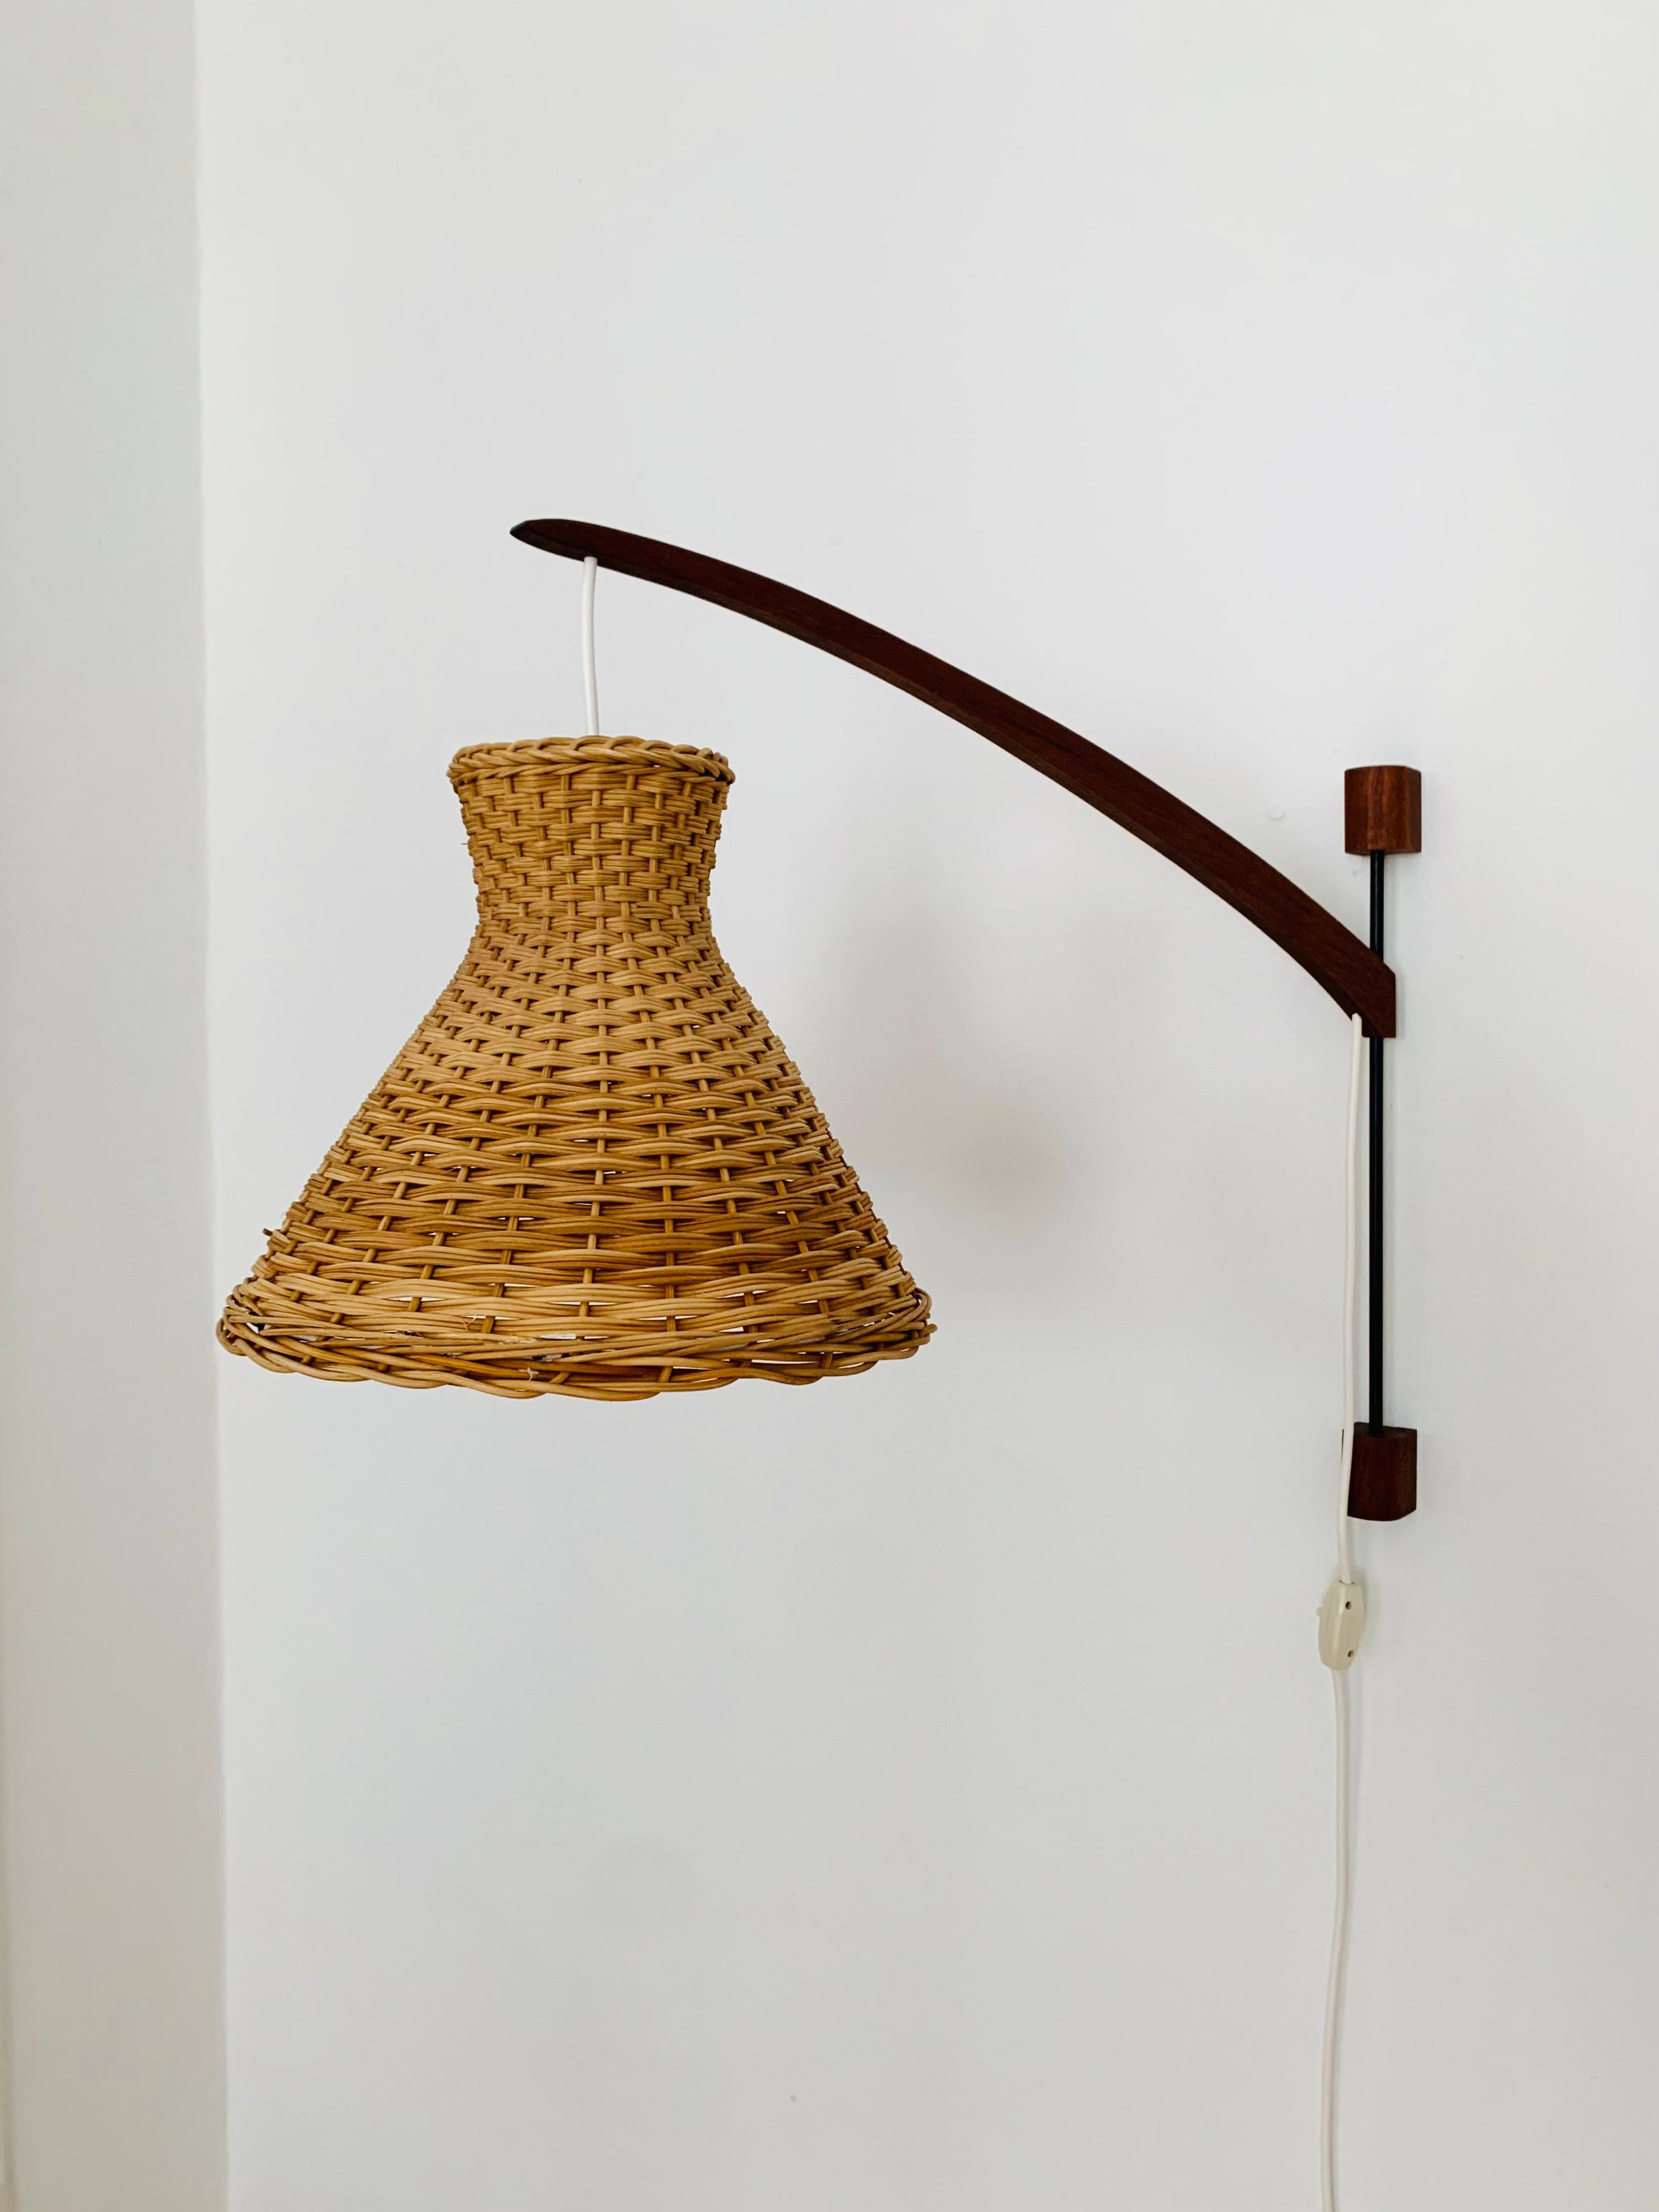 Wonderful Danish teak wall lamp from the 1960s.
Great and exceptionally minimalistic design with a fantastically elegant look.
Very nice swiveling teak arm.
The lampshade creates a spectacular play of light and creates a very cozy